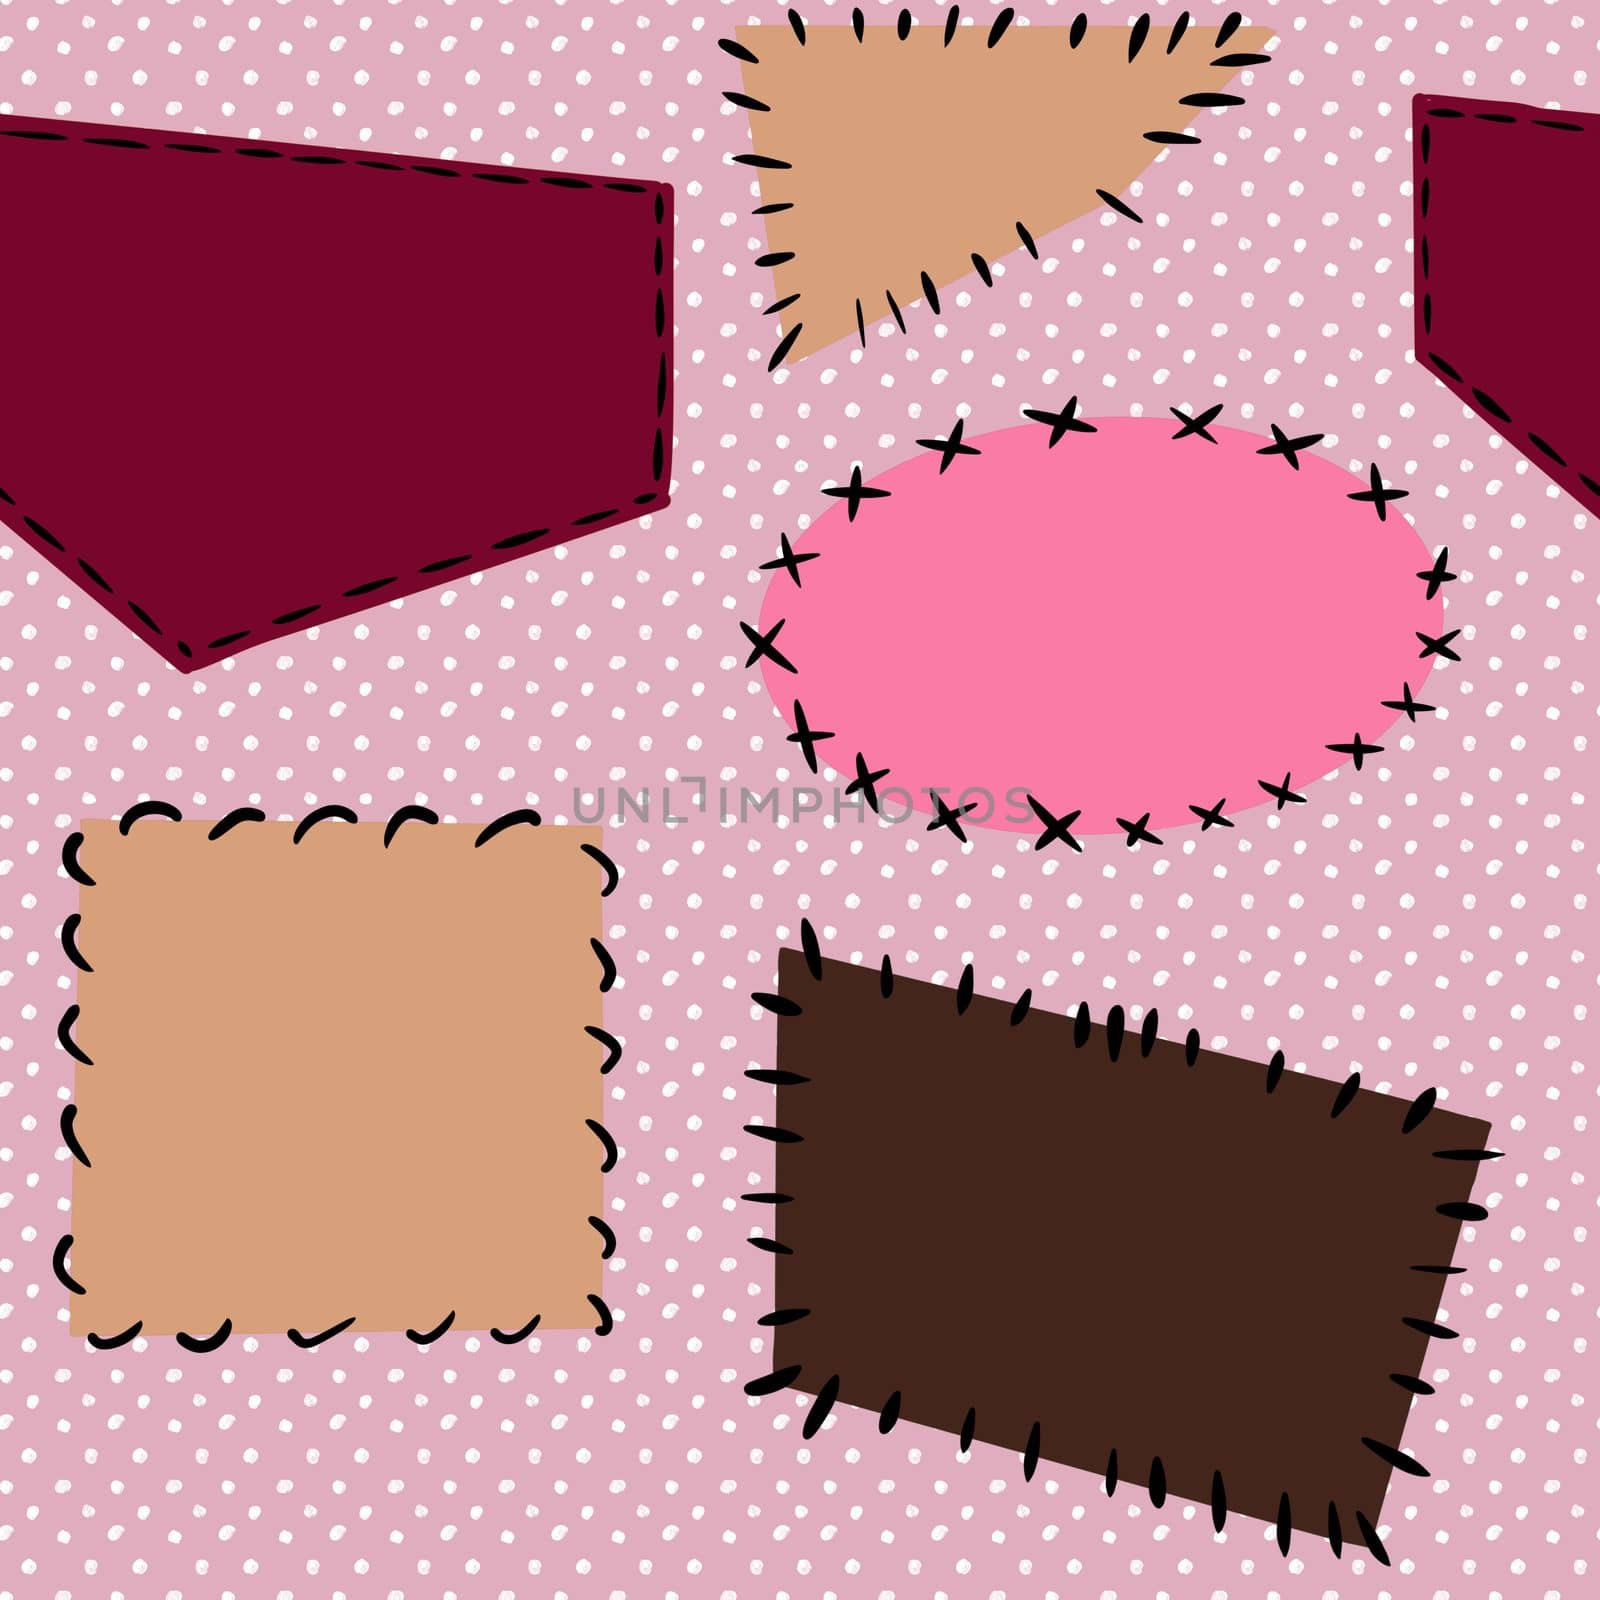 Hand drawn seamless pattern with mending sewing crafts dressmaking items. Pink brown beige polka dot background, tailor cute sew print, handmade needwork business hobby, fabric handcraft design